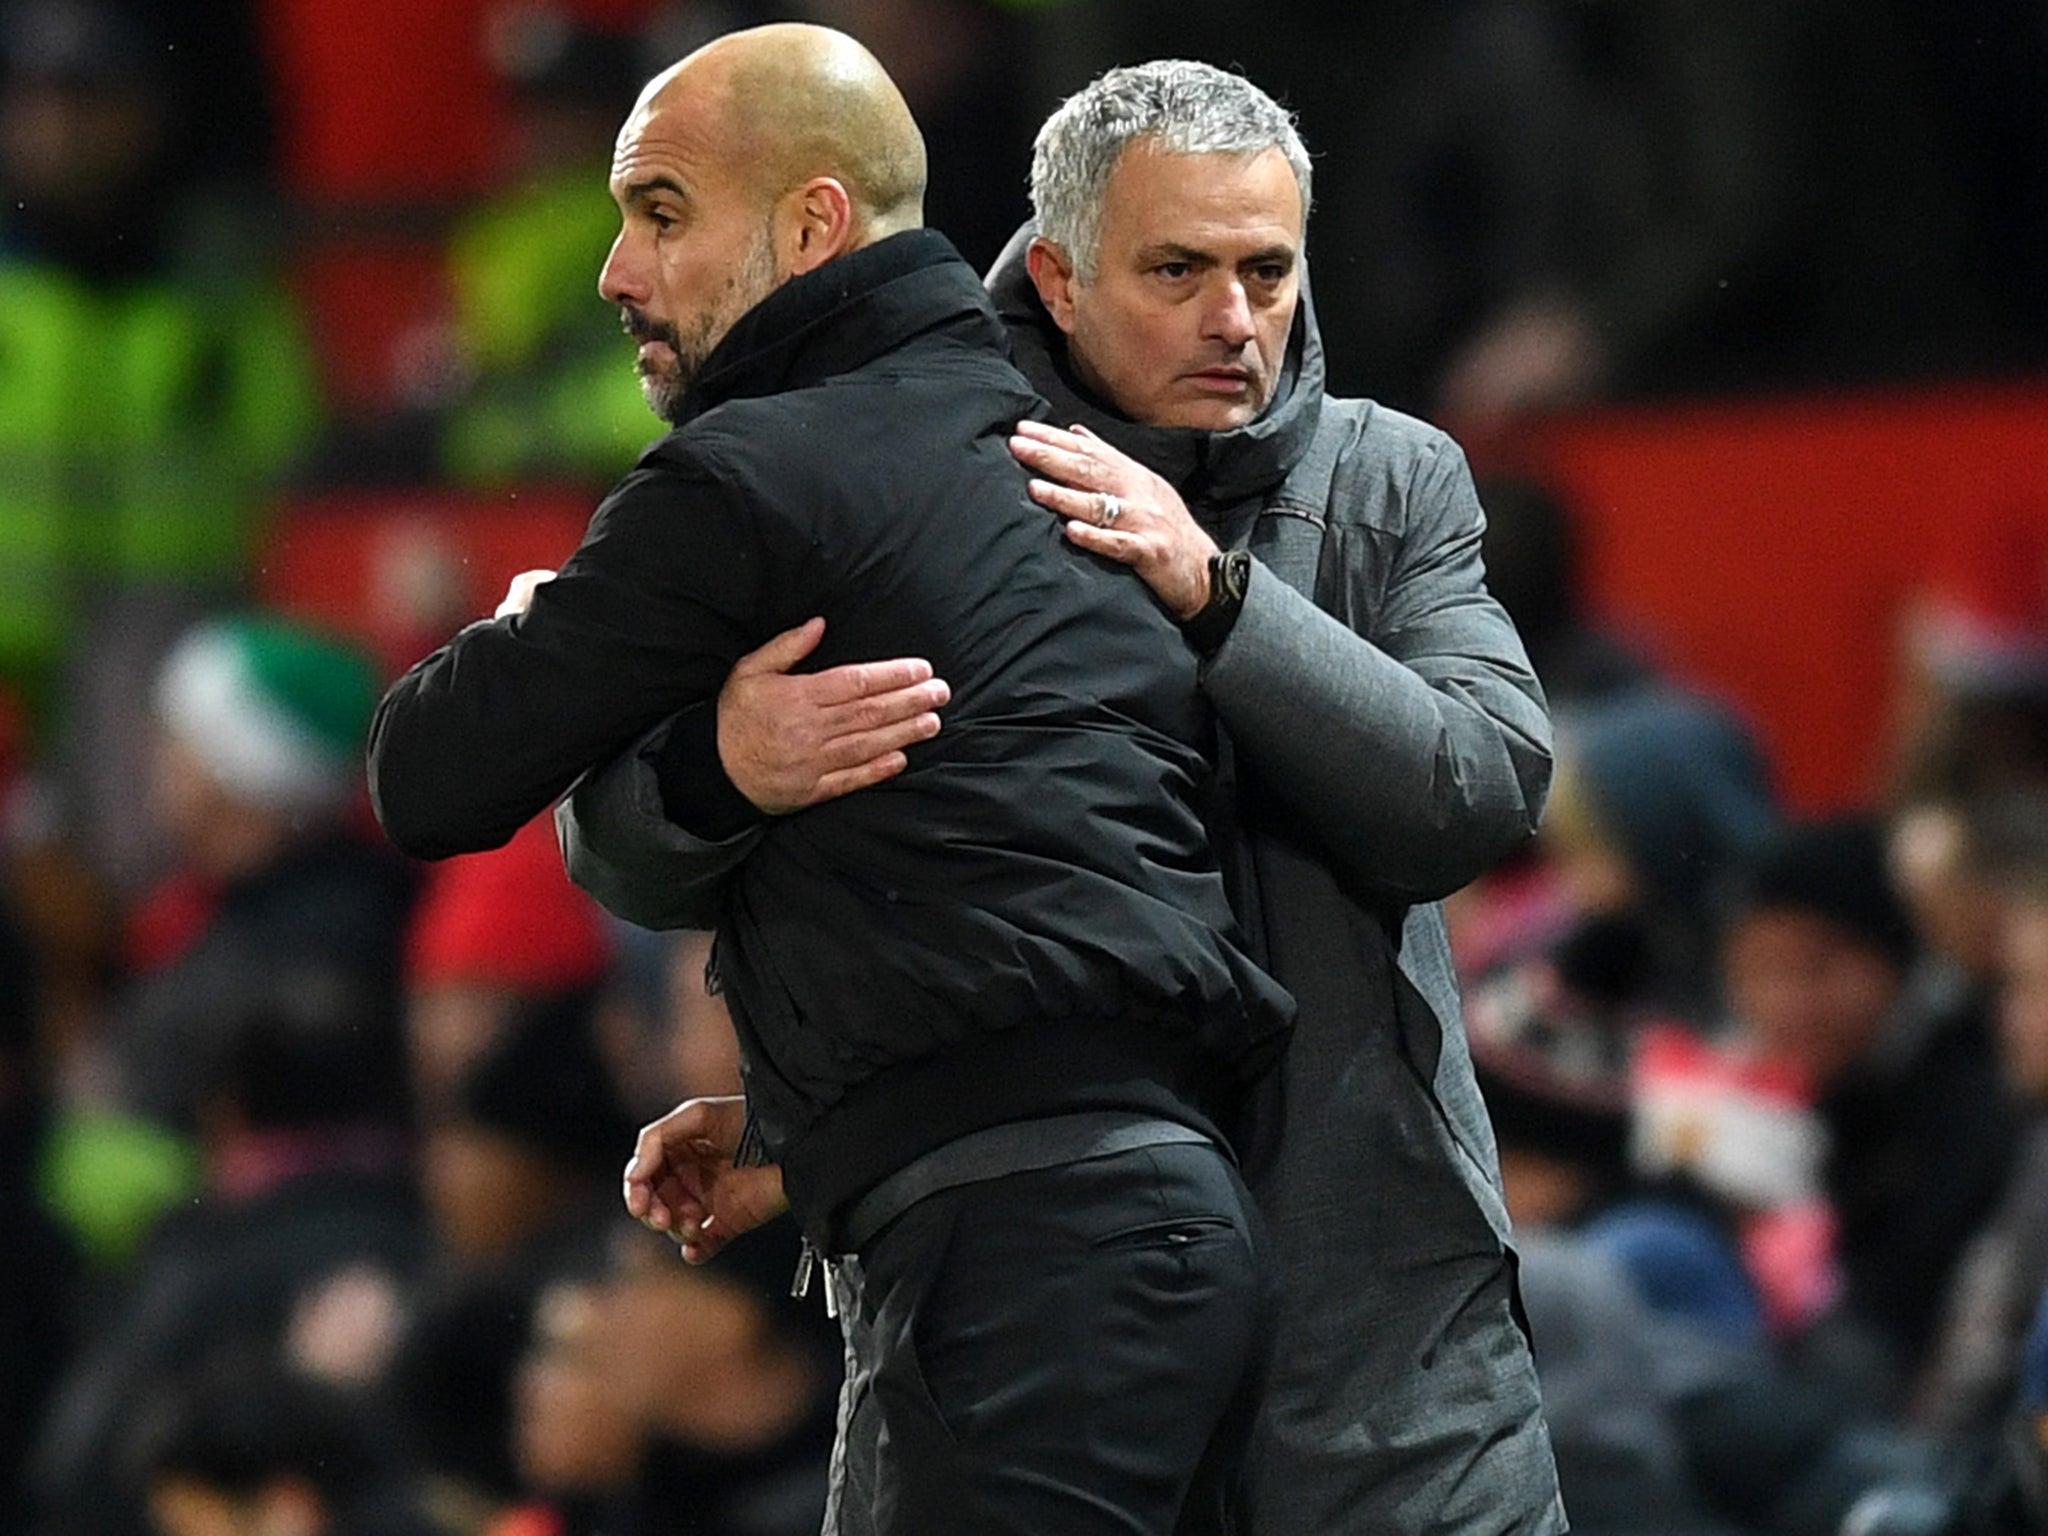 Manchester City and Manchester United were involved in a post-derby fracas after Sunday's encounter